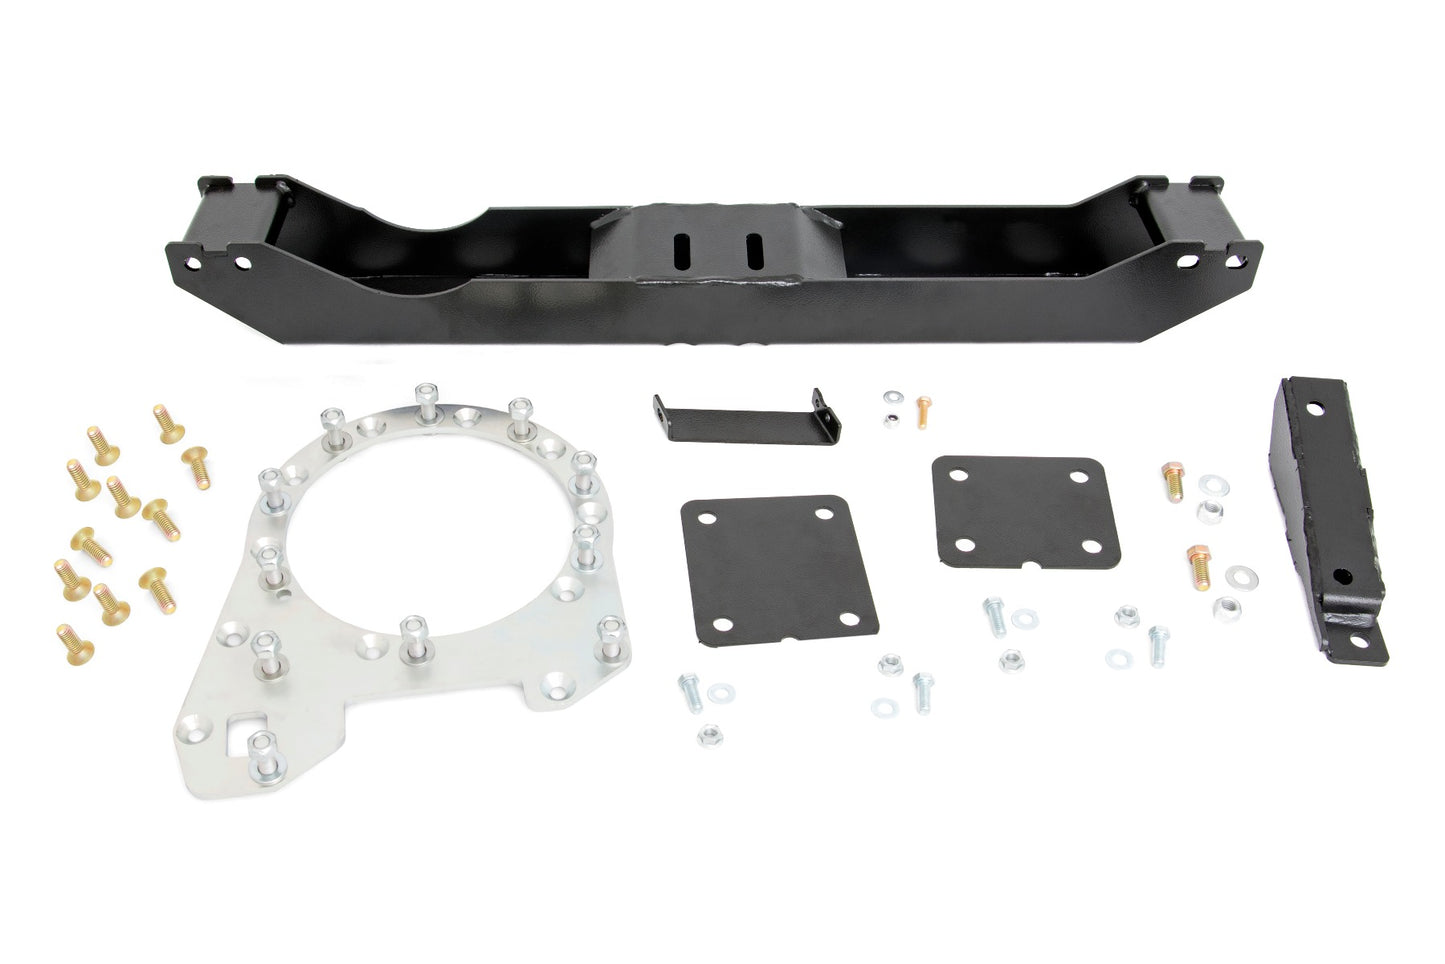 Rough Country (50340) 6 Inch Lift Kit | Diesel | OVLD | M1 | Ford F-250/F-350 Super Duty (17-22)